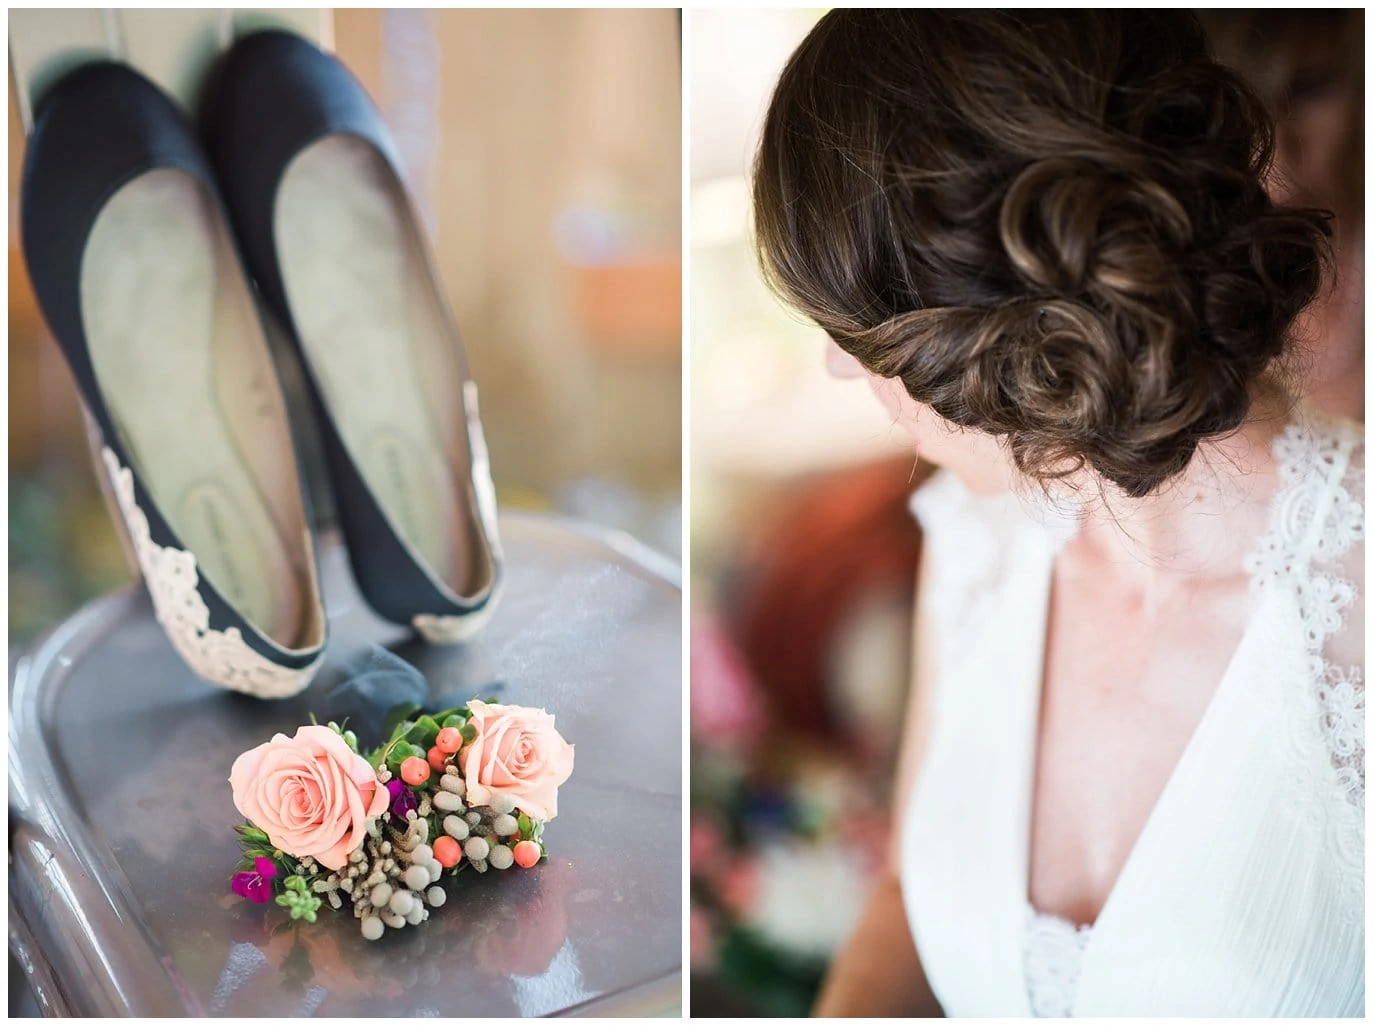 blue lace wedding shoes and bridal updo at Lyons Riverbend Wedding by Lyons Wedding Photographer Jennie Crate